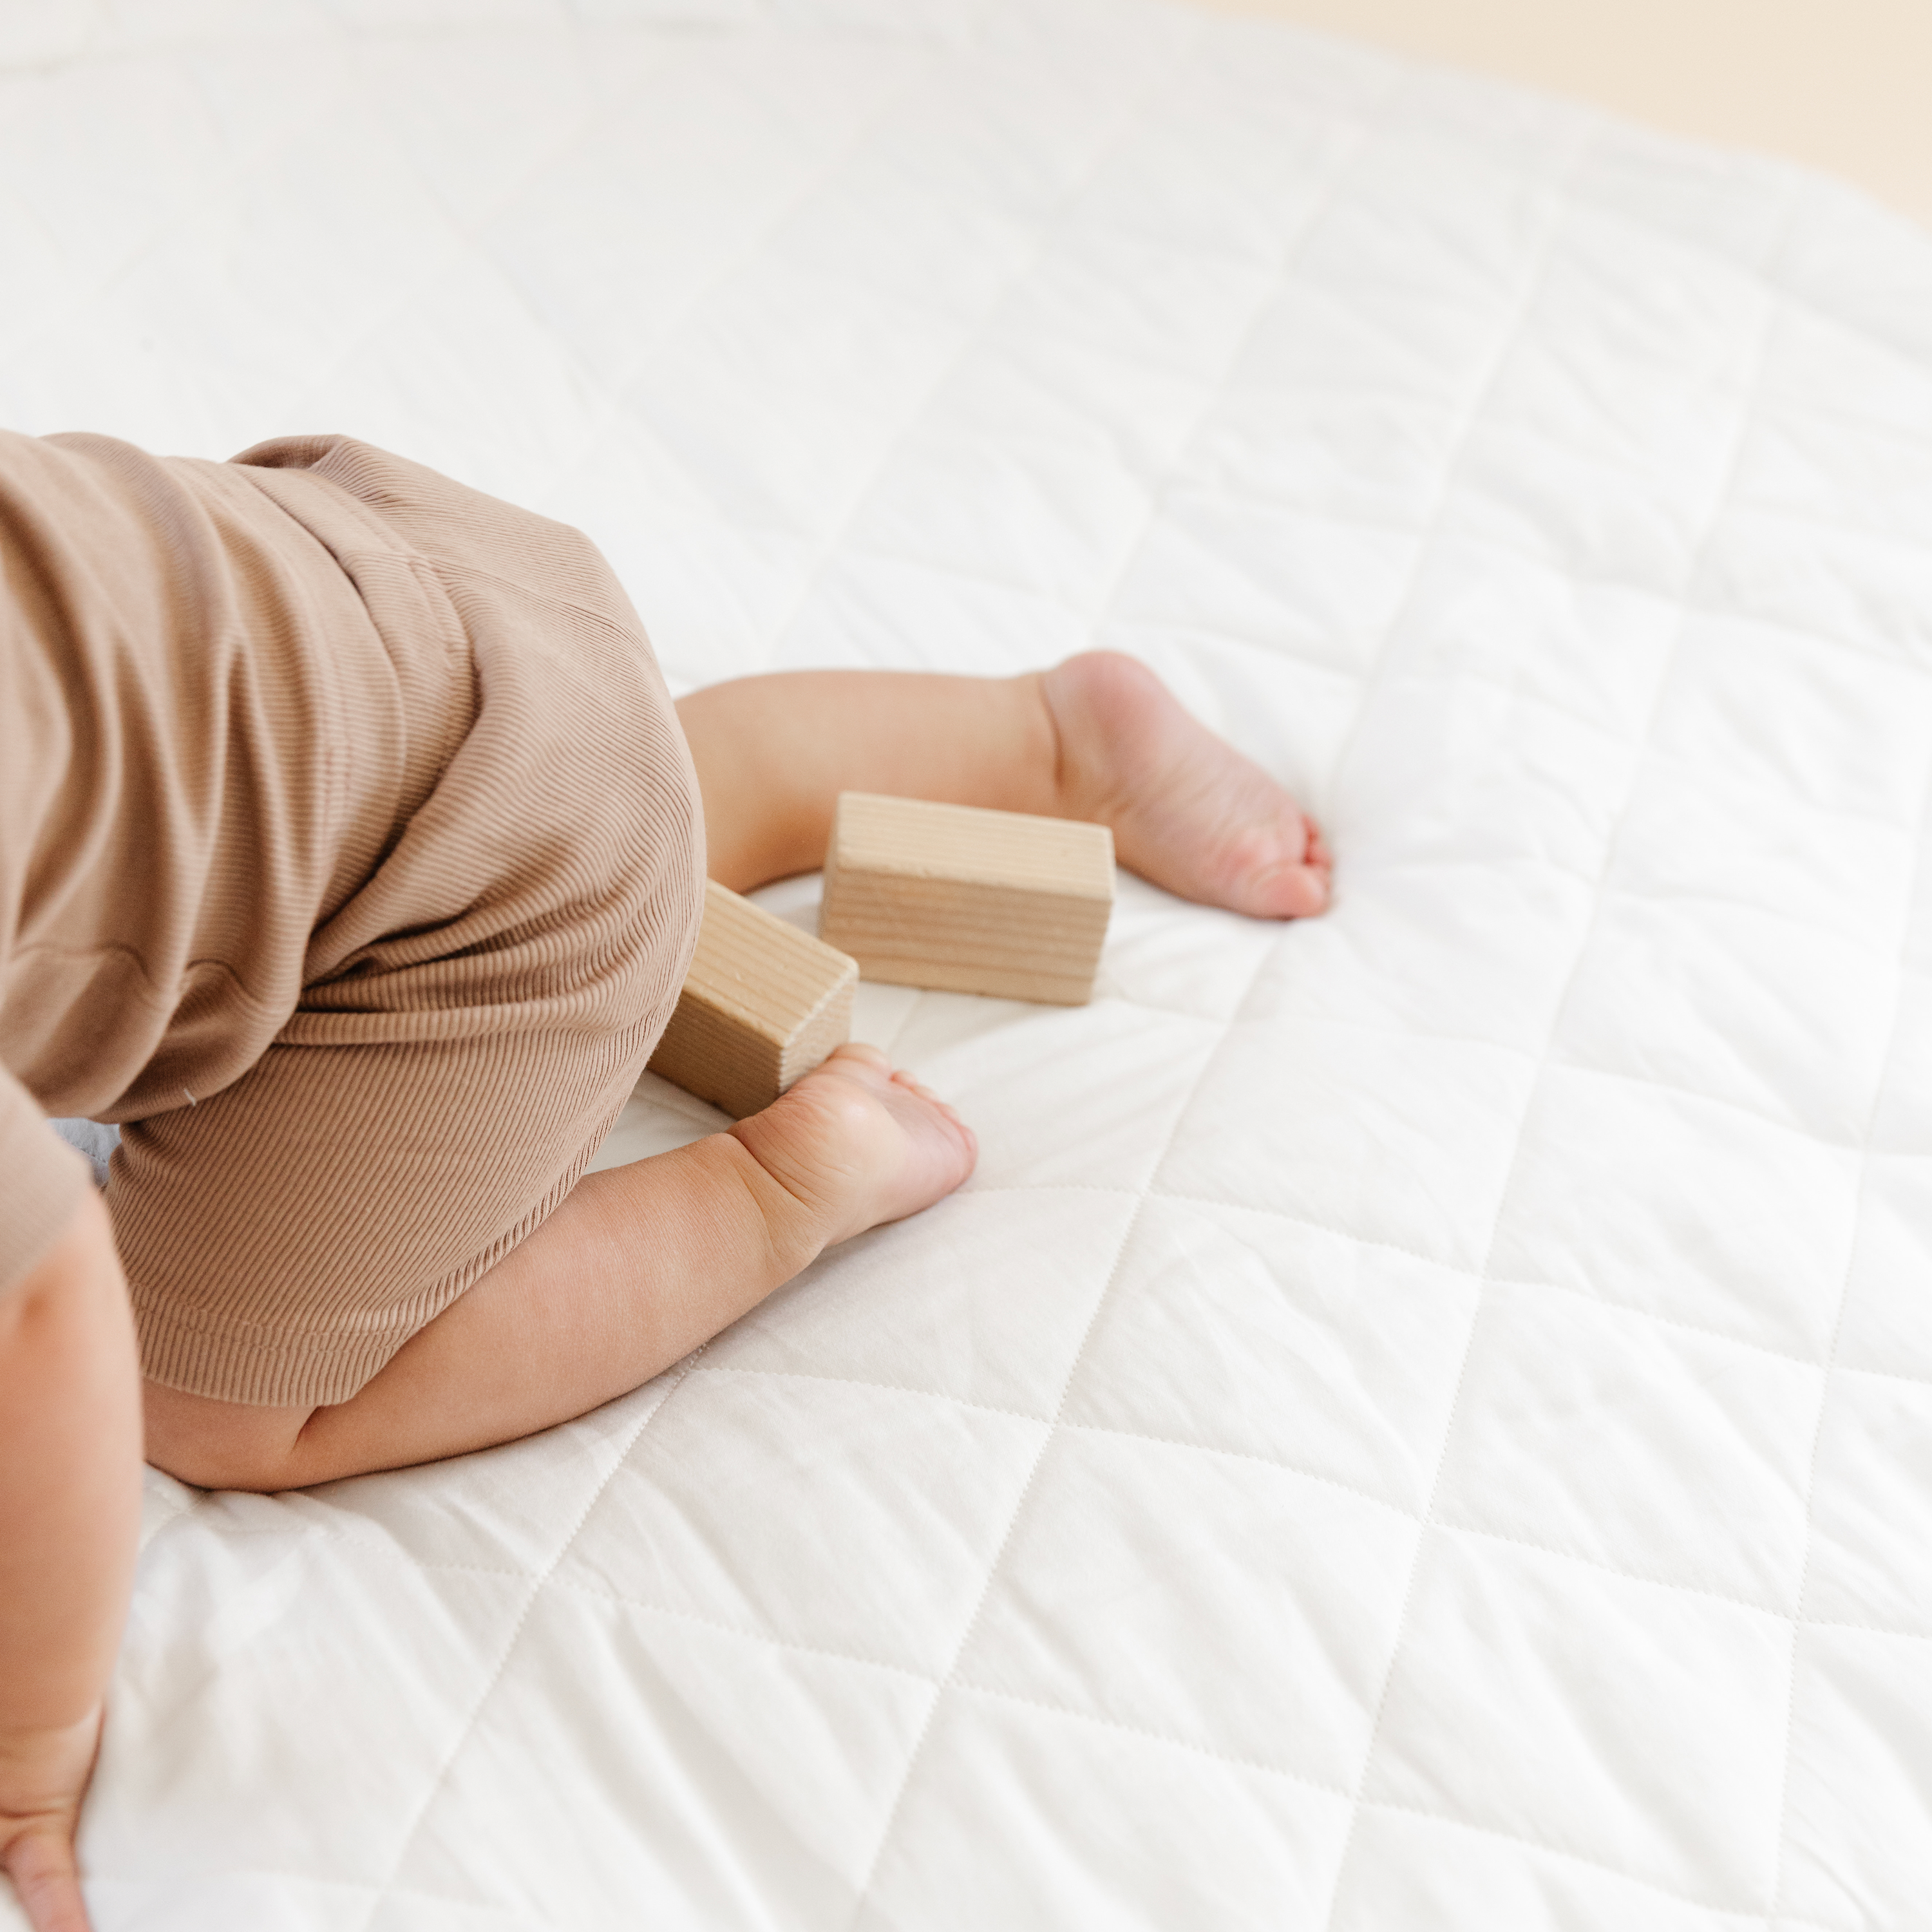 A baby in a brown onesie sits on an Organic Cotton Quilted Reversible Play Mat - Blossom  in Ivory, playing with two wooden blocks. the focus is on the baby's back and bare feet.